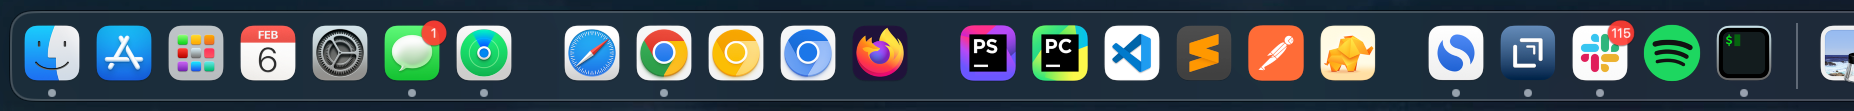 Add spacers to MacOS Dock